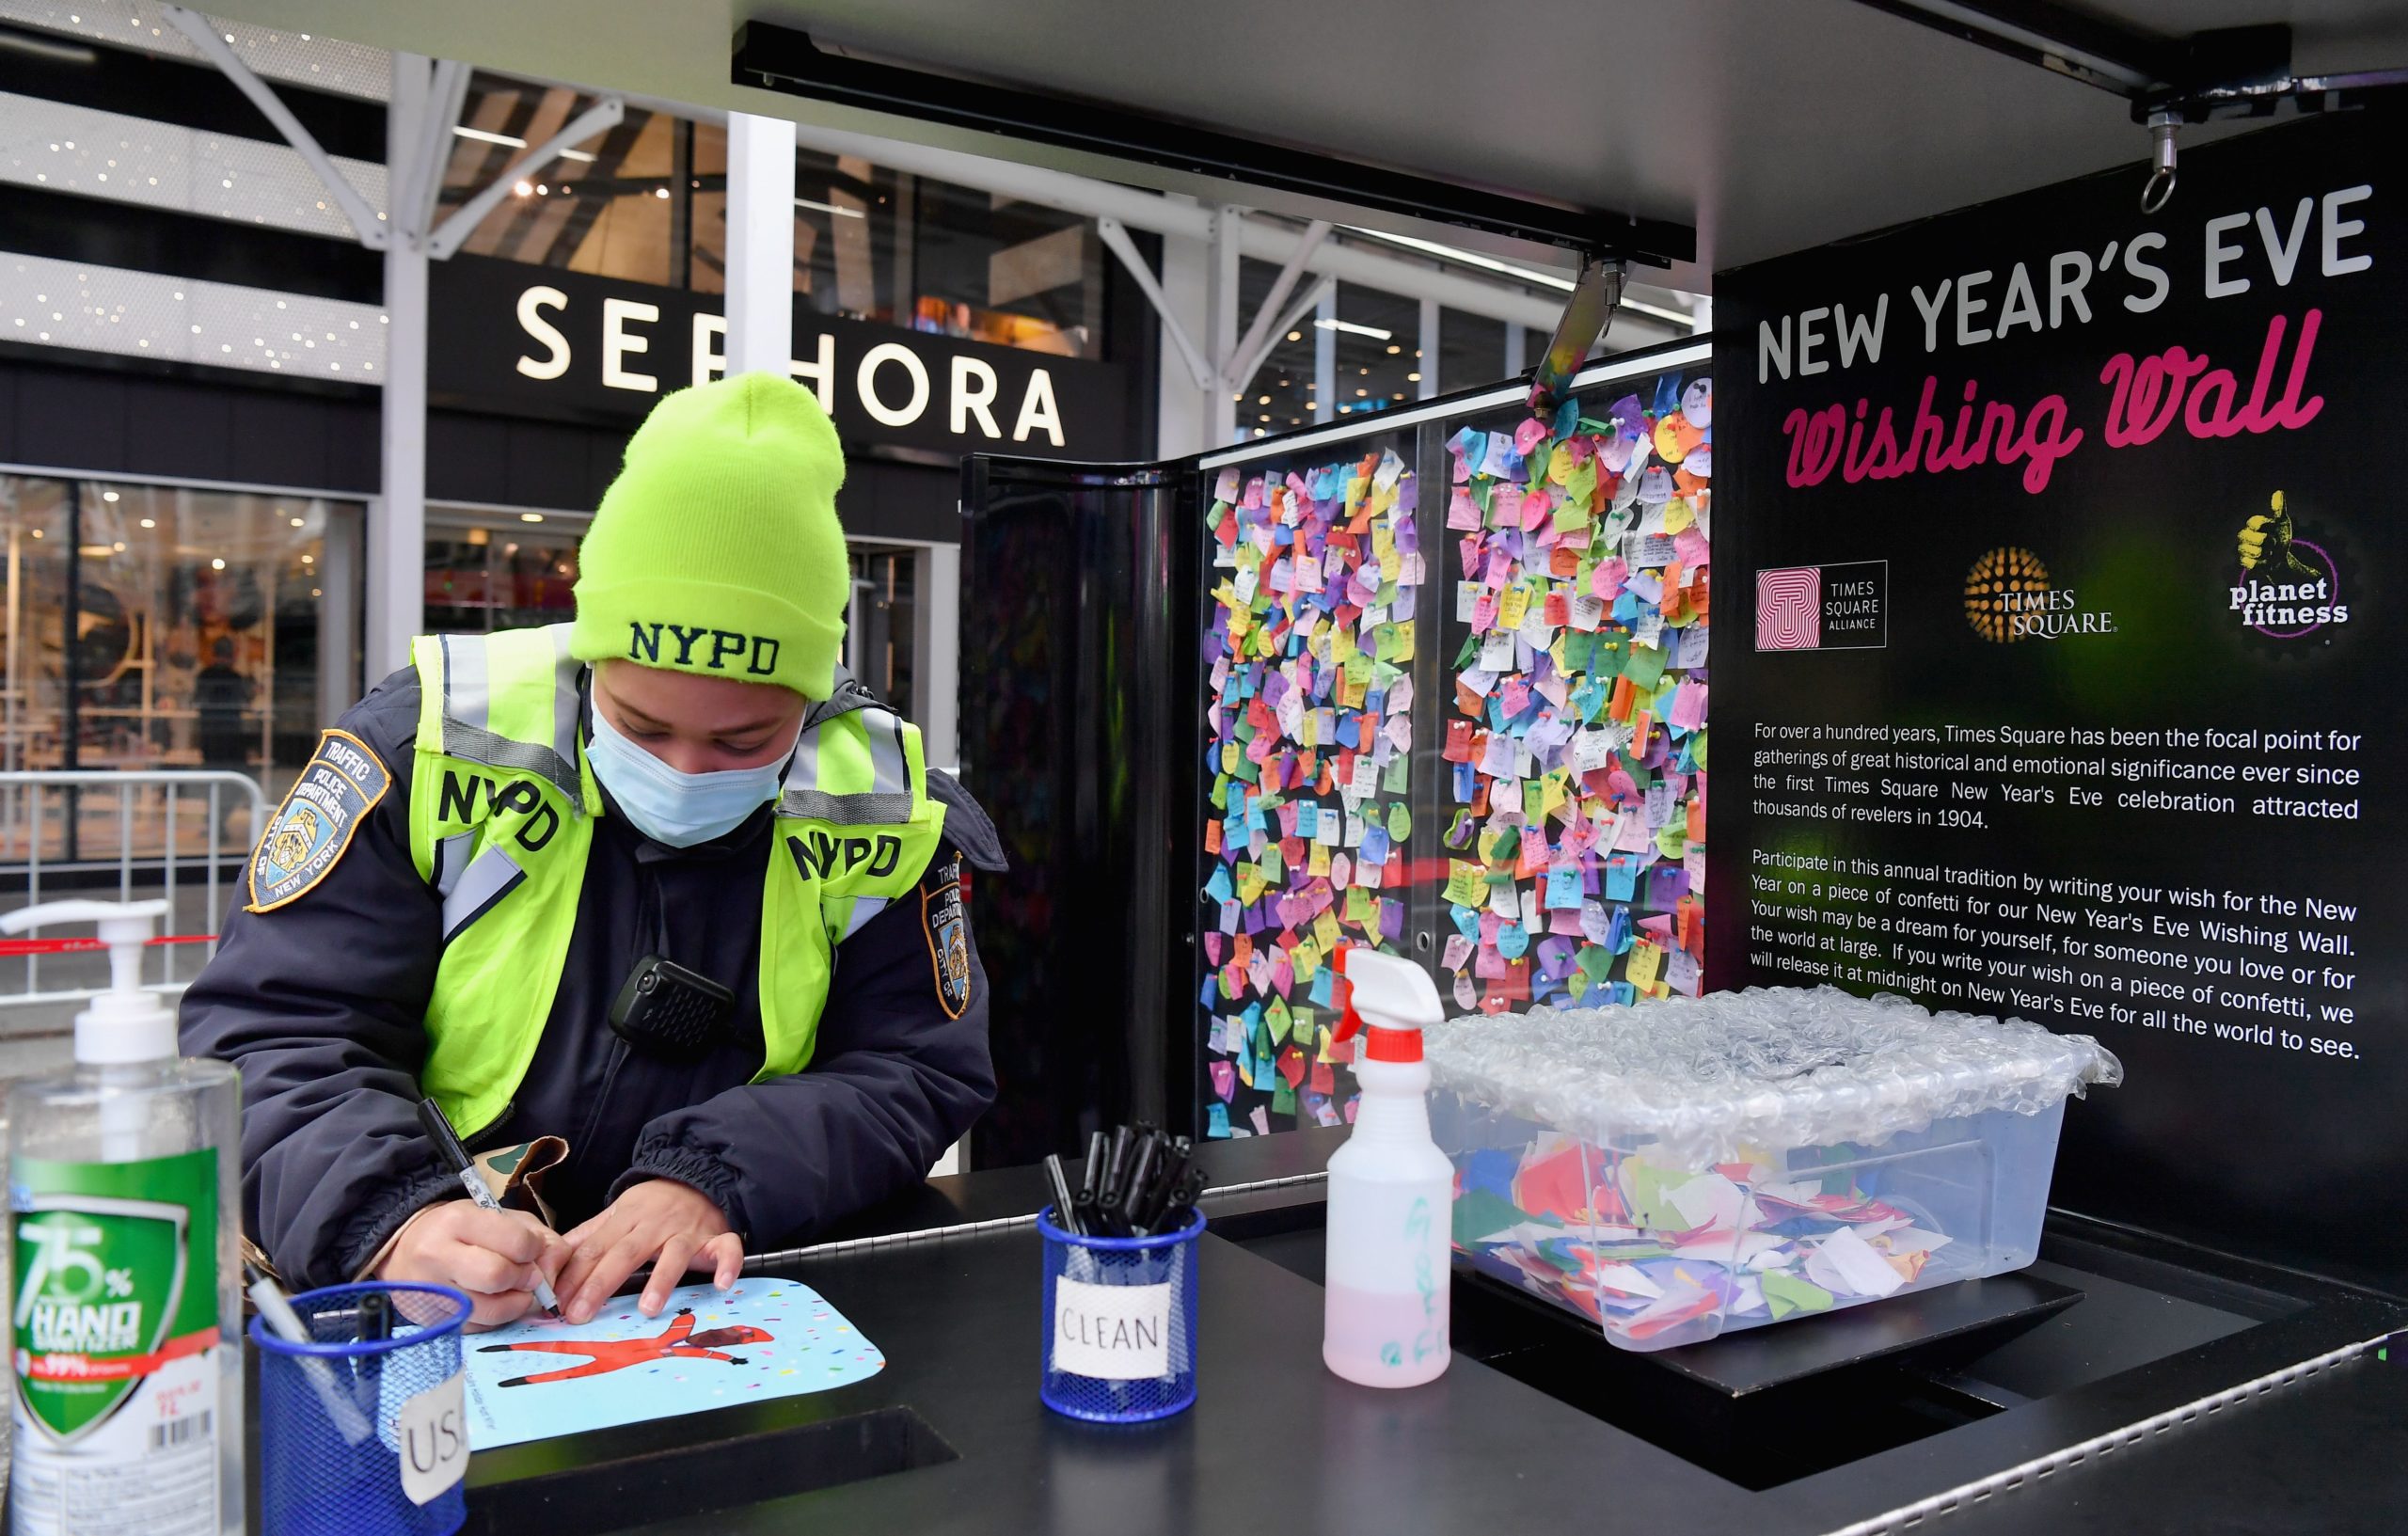 An NYPD officer writes down a note on confetti during the 14th annual Good Riddance Day in Times Square ahead of New year's Eve on December 28, 2020 in New York City. (Photo by ANGELA WEISS/AFP via Getty Images)